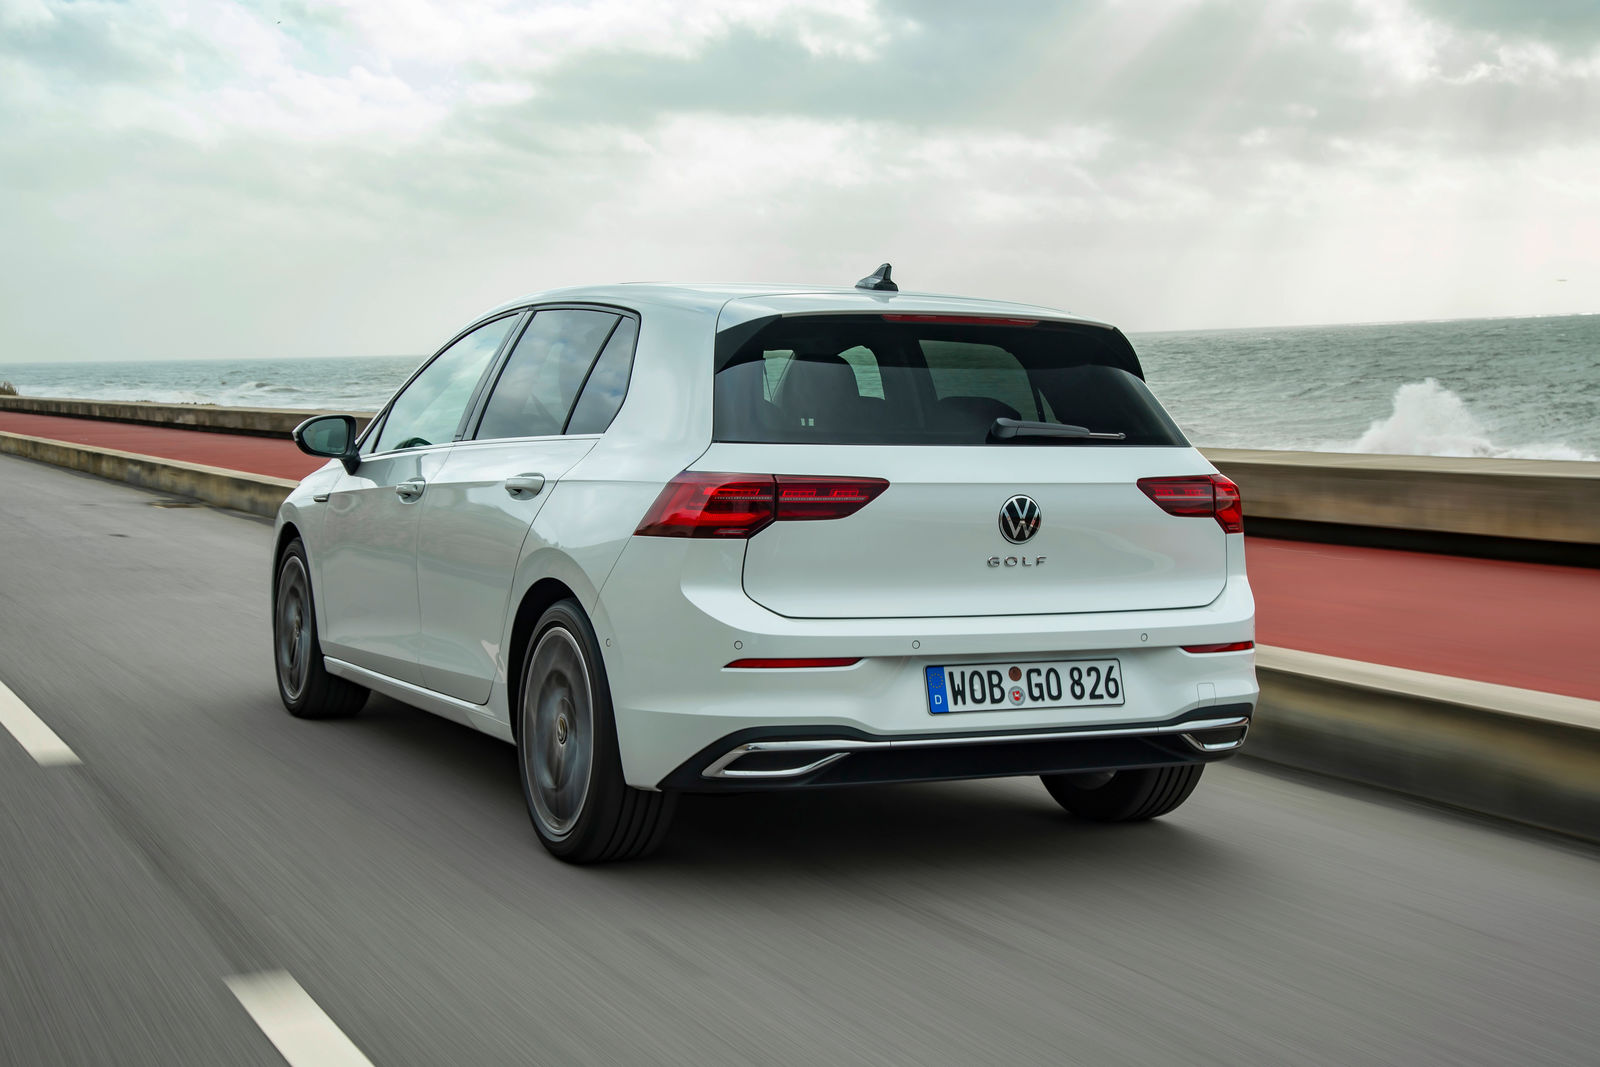 The technical data of the new Golf, new golf 